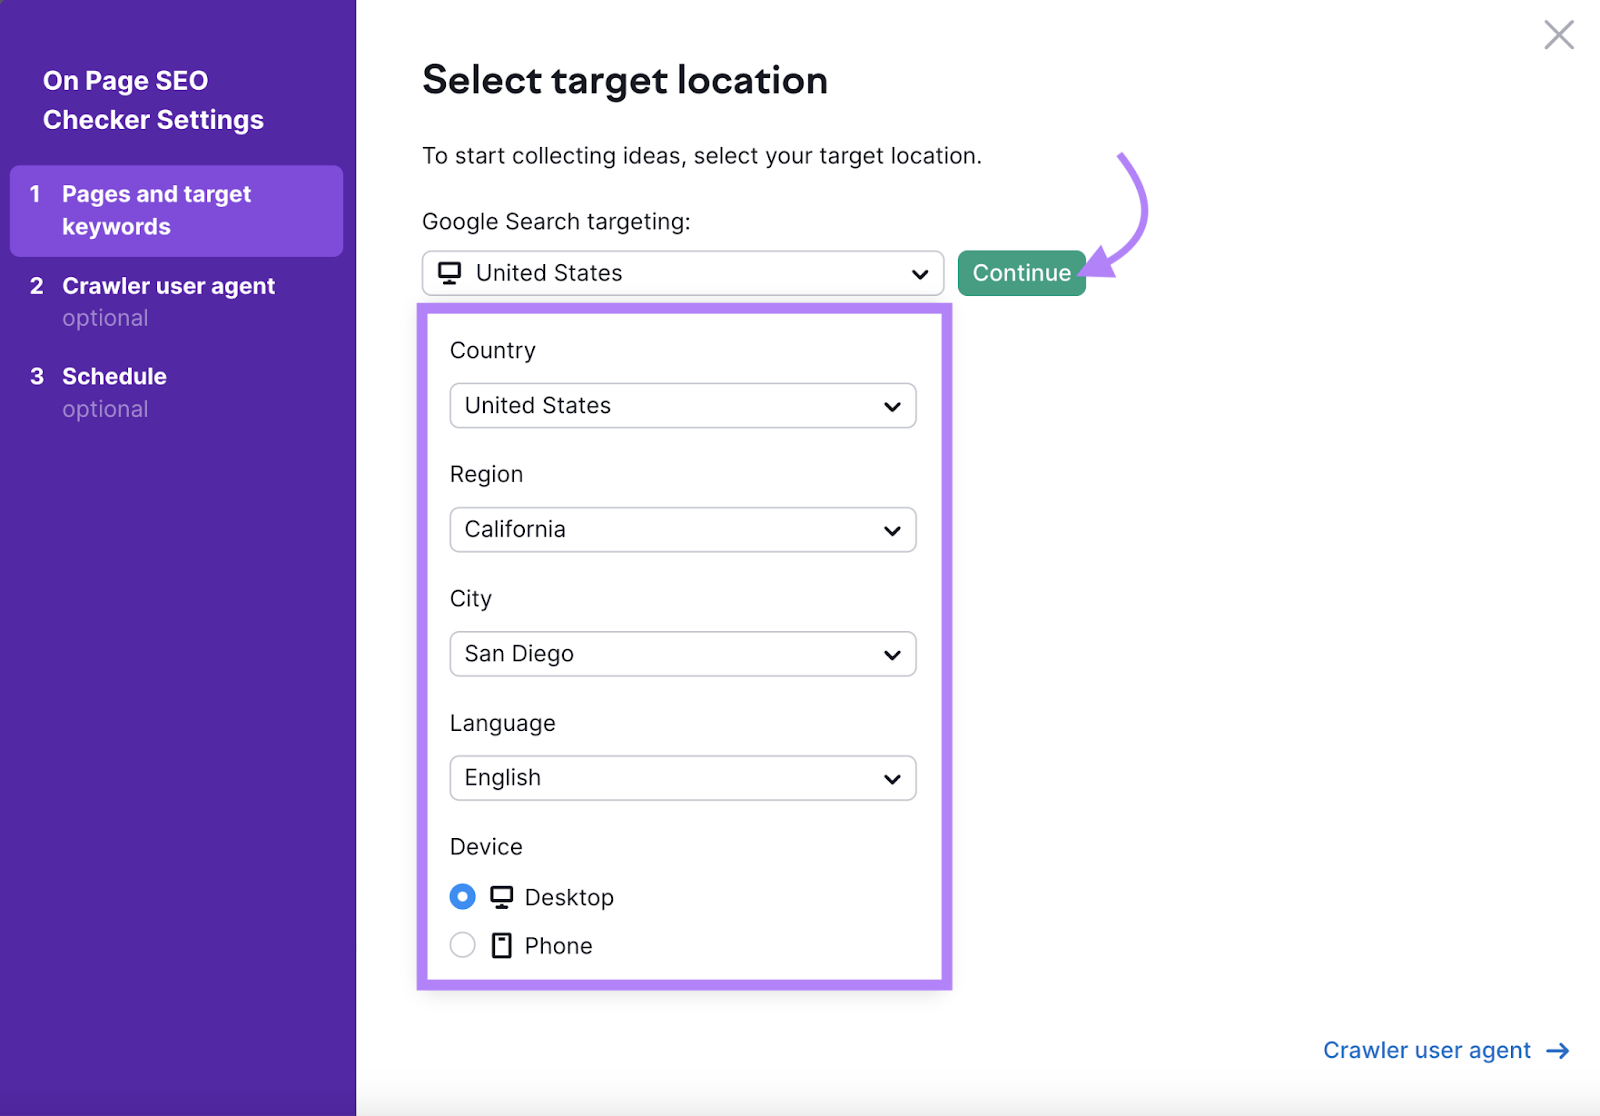 Select target location in On Page SEO Checker settings